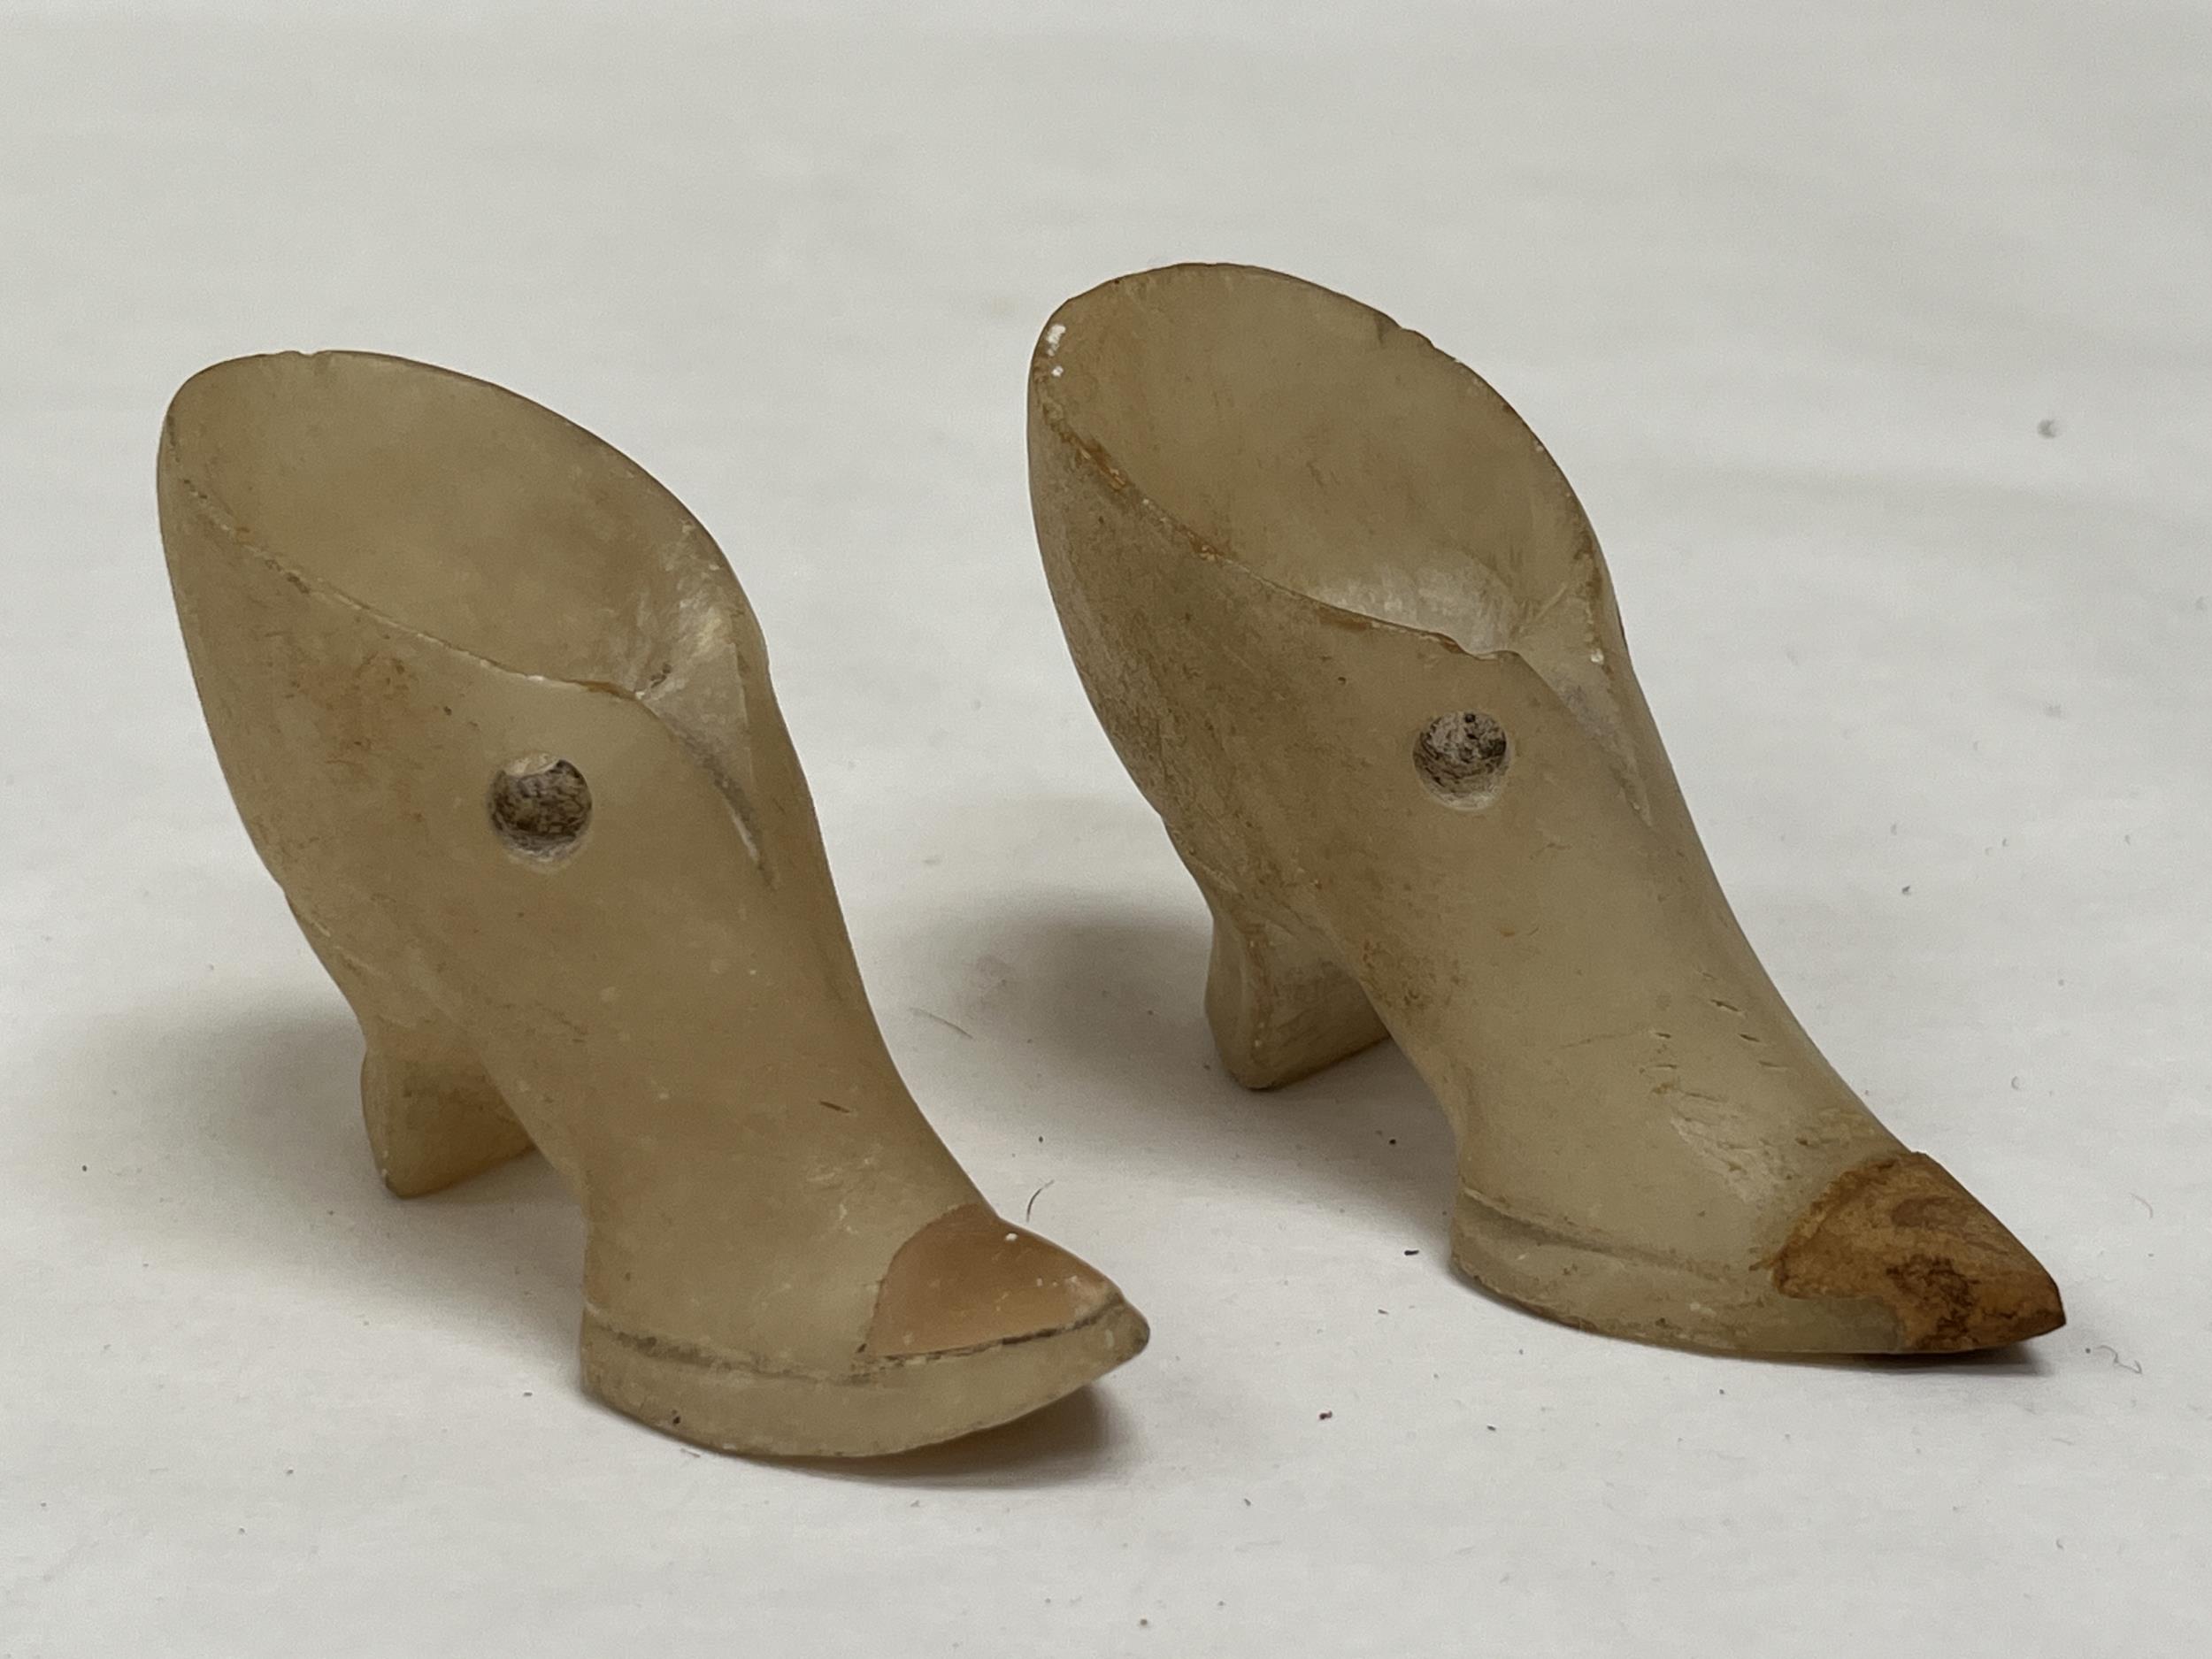 A pair of alabaster shoes, 3" long.